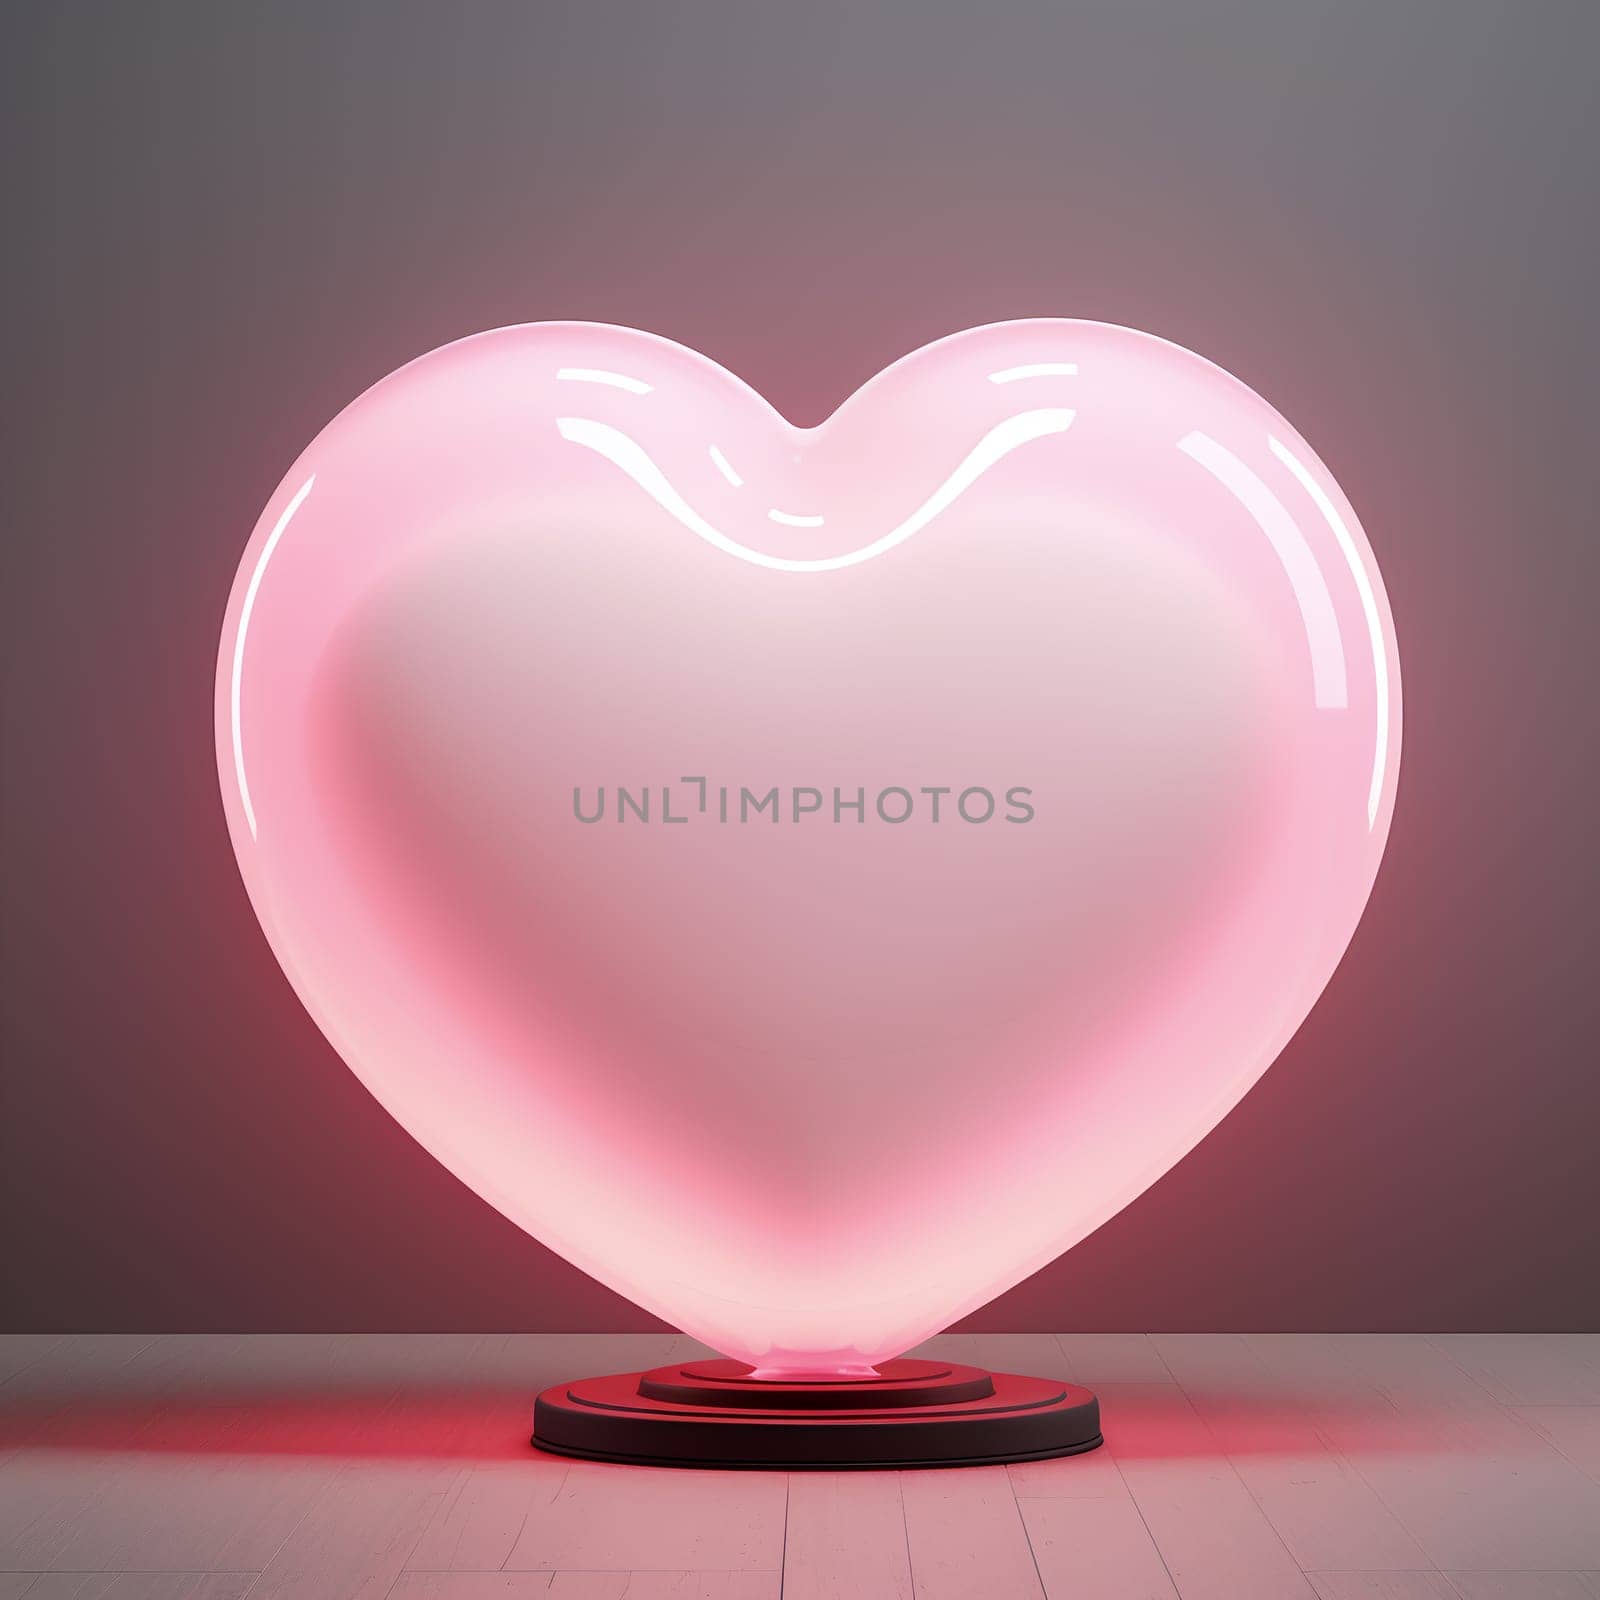 Glowing Pink Heart-Shaped Balloon in a Studio Setting at Twilight by chrisroll